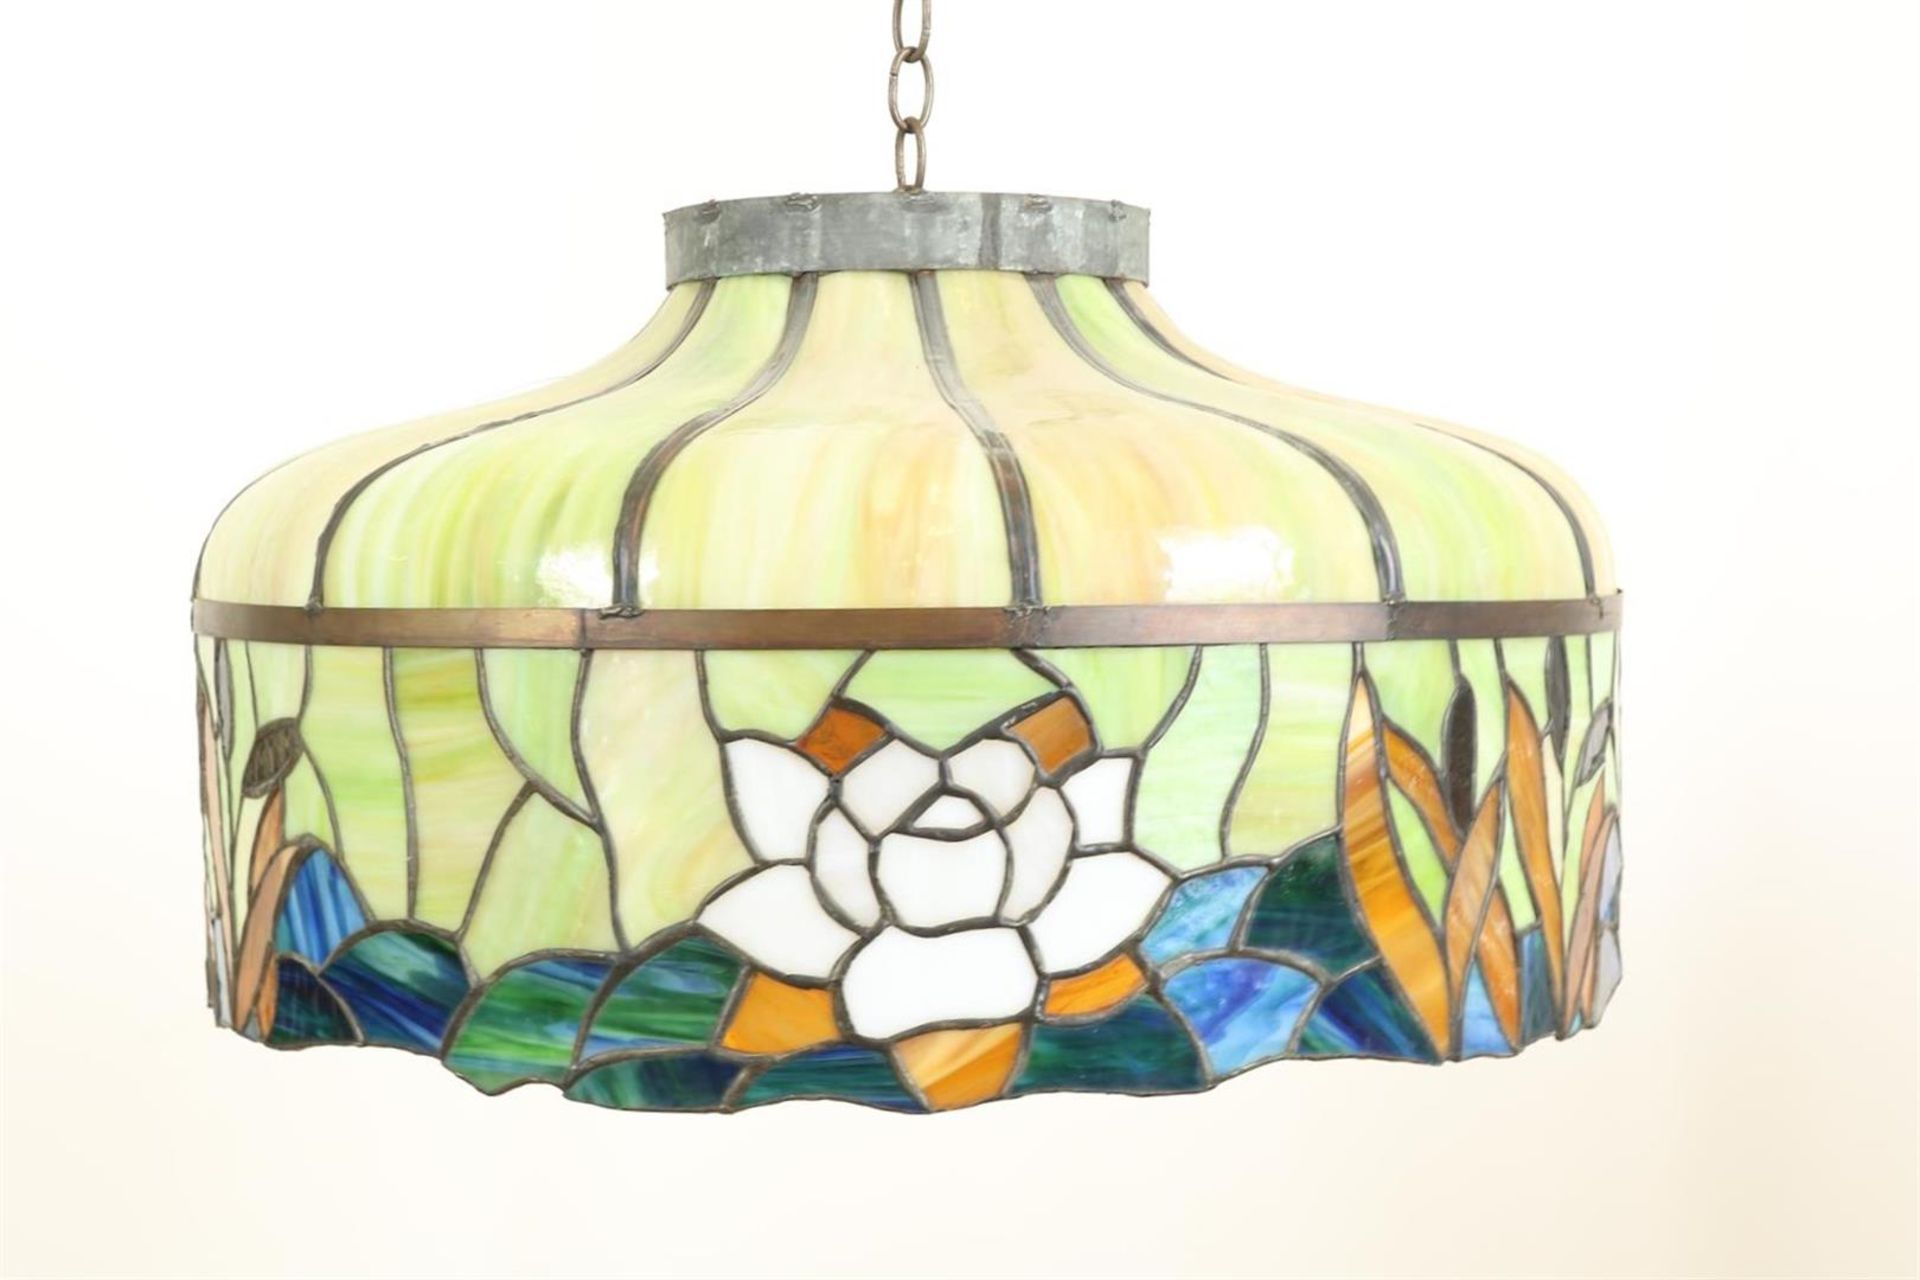 Glass Tiffany style hanging lamp with stained glass flowers, approx. 40 years old, h. 38 diam. 61